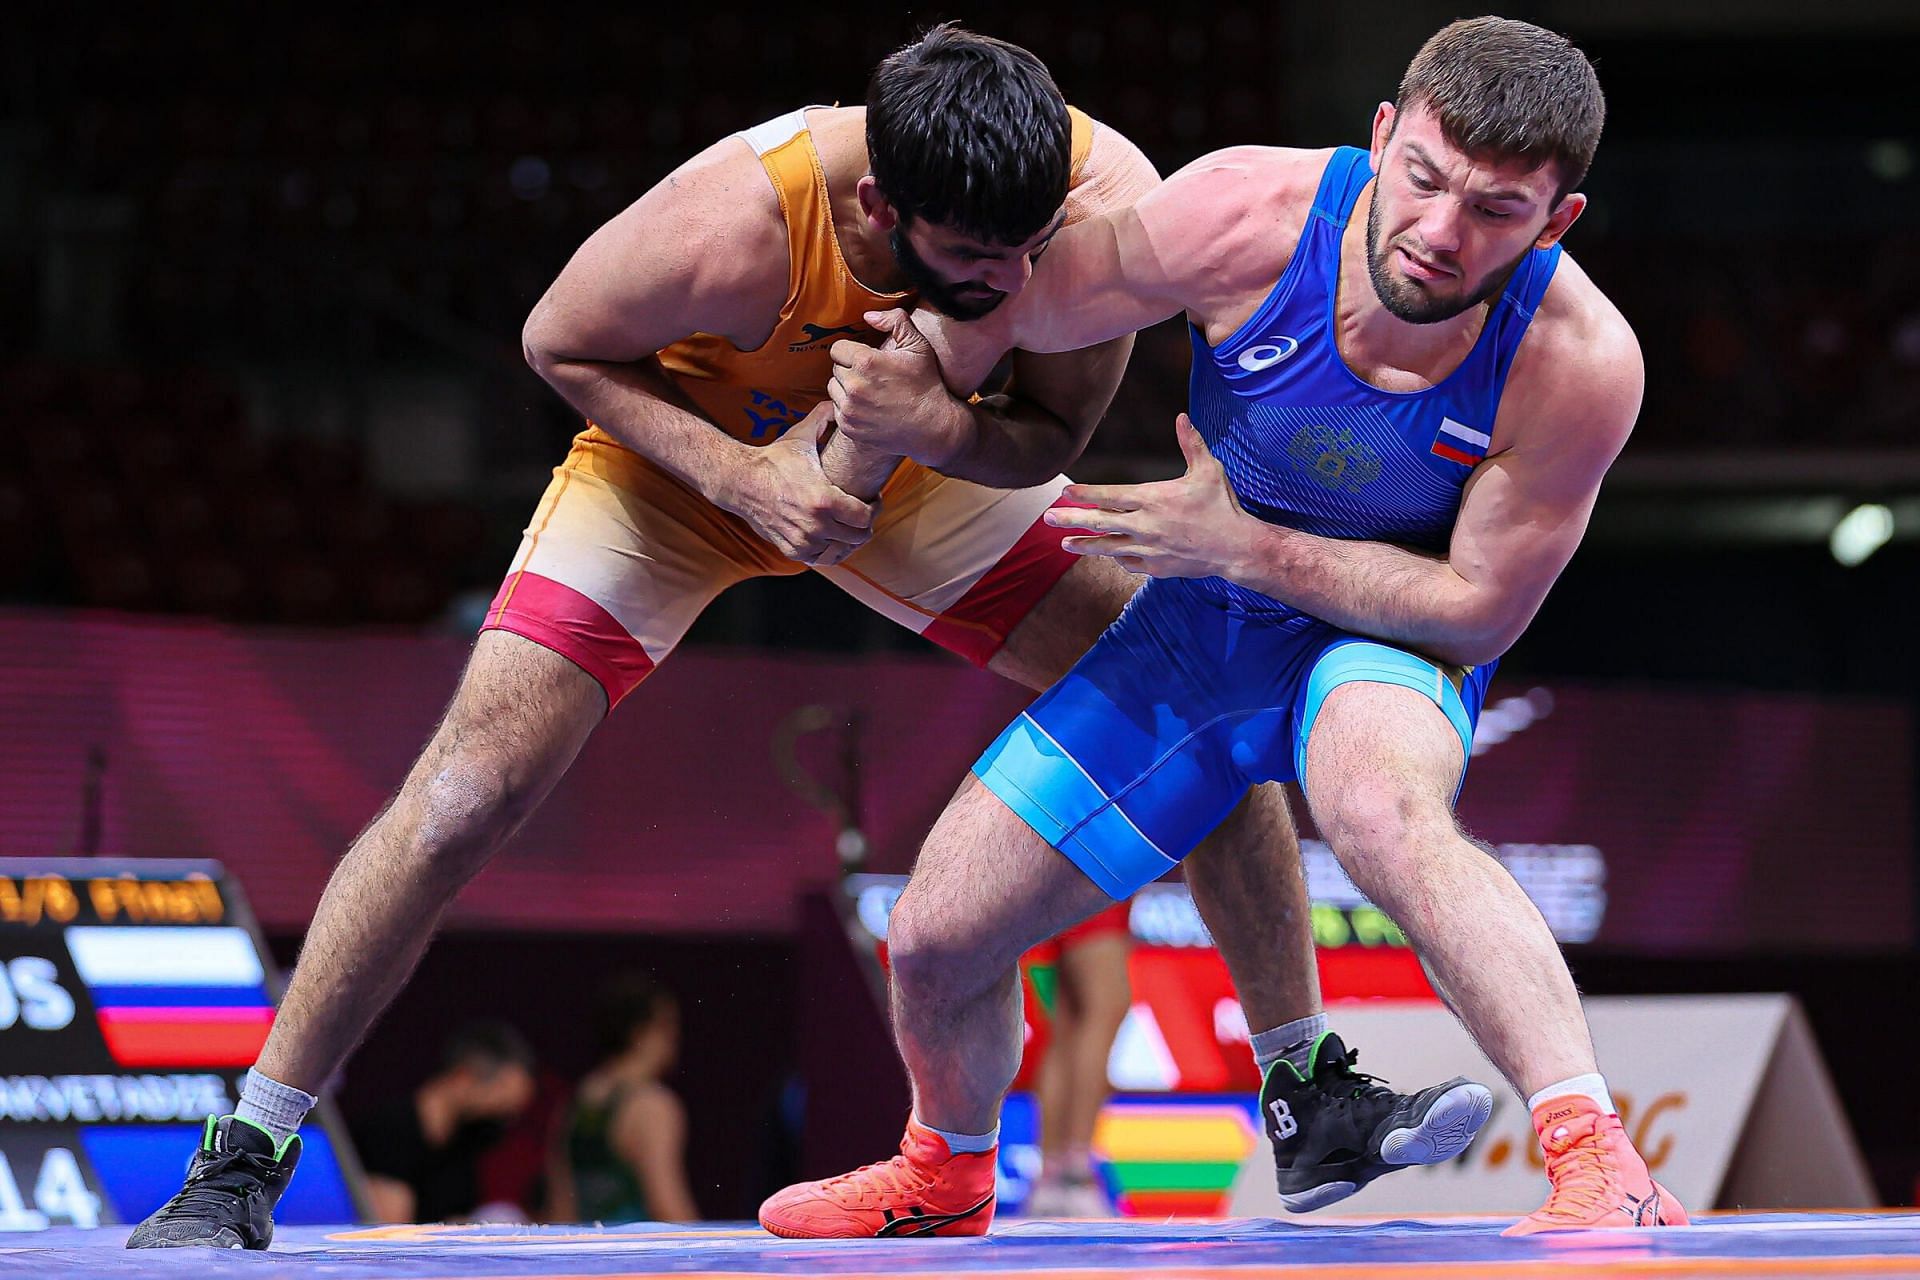 U23 Wrestling World Championships India’s medal hopes hang by thread